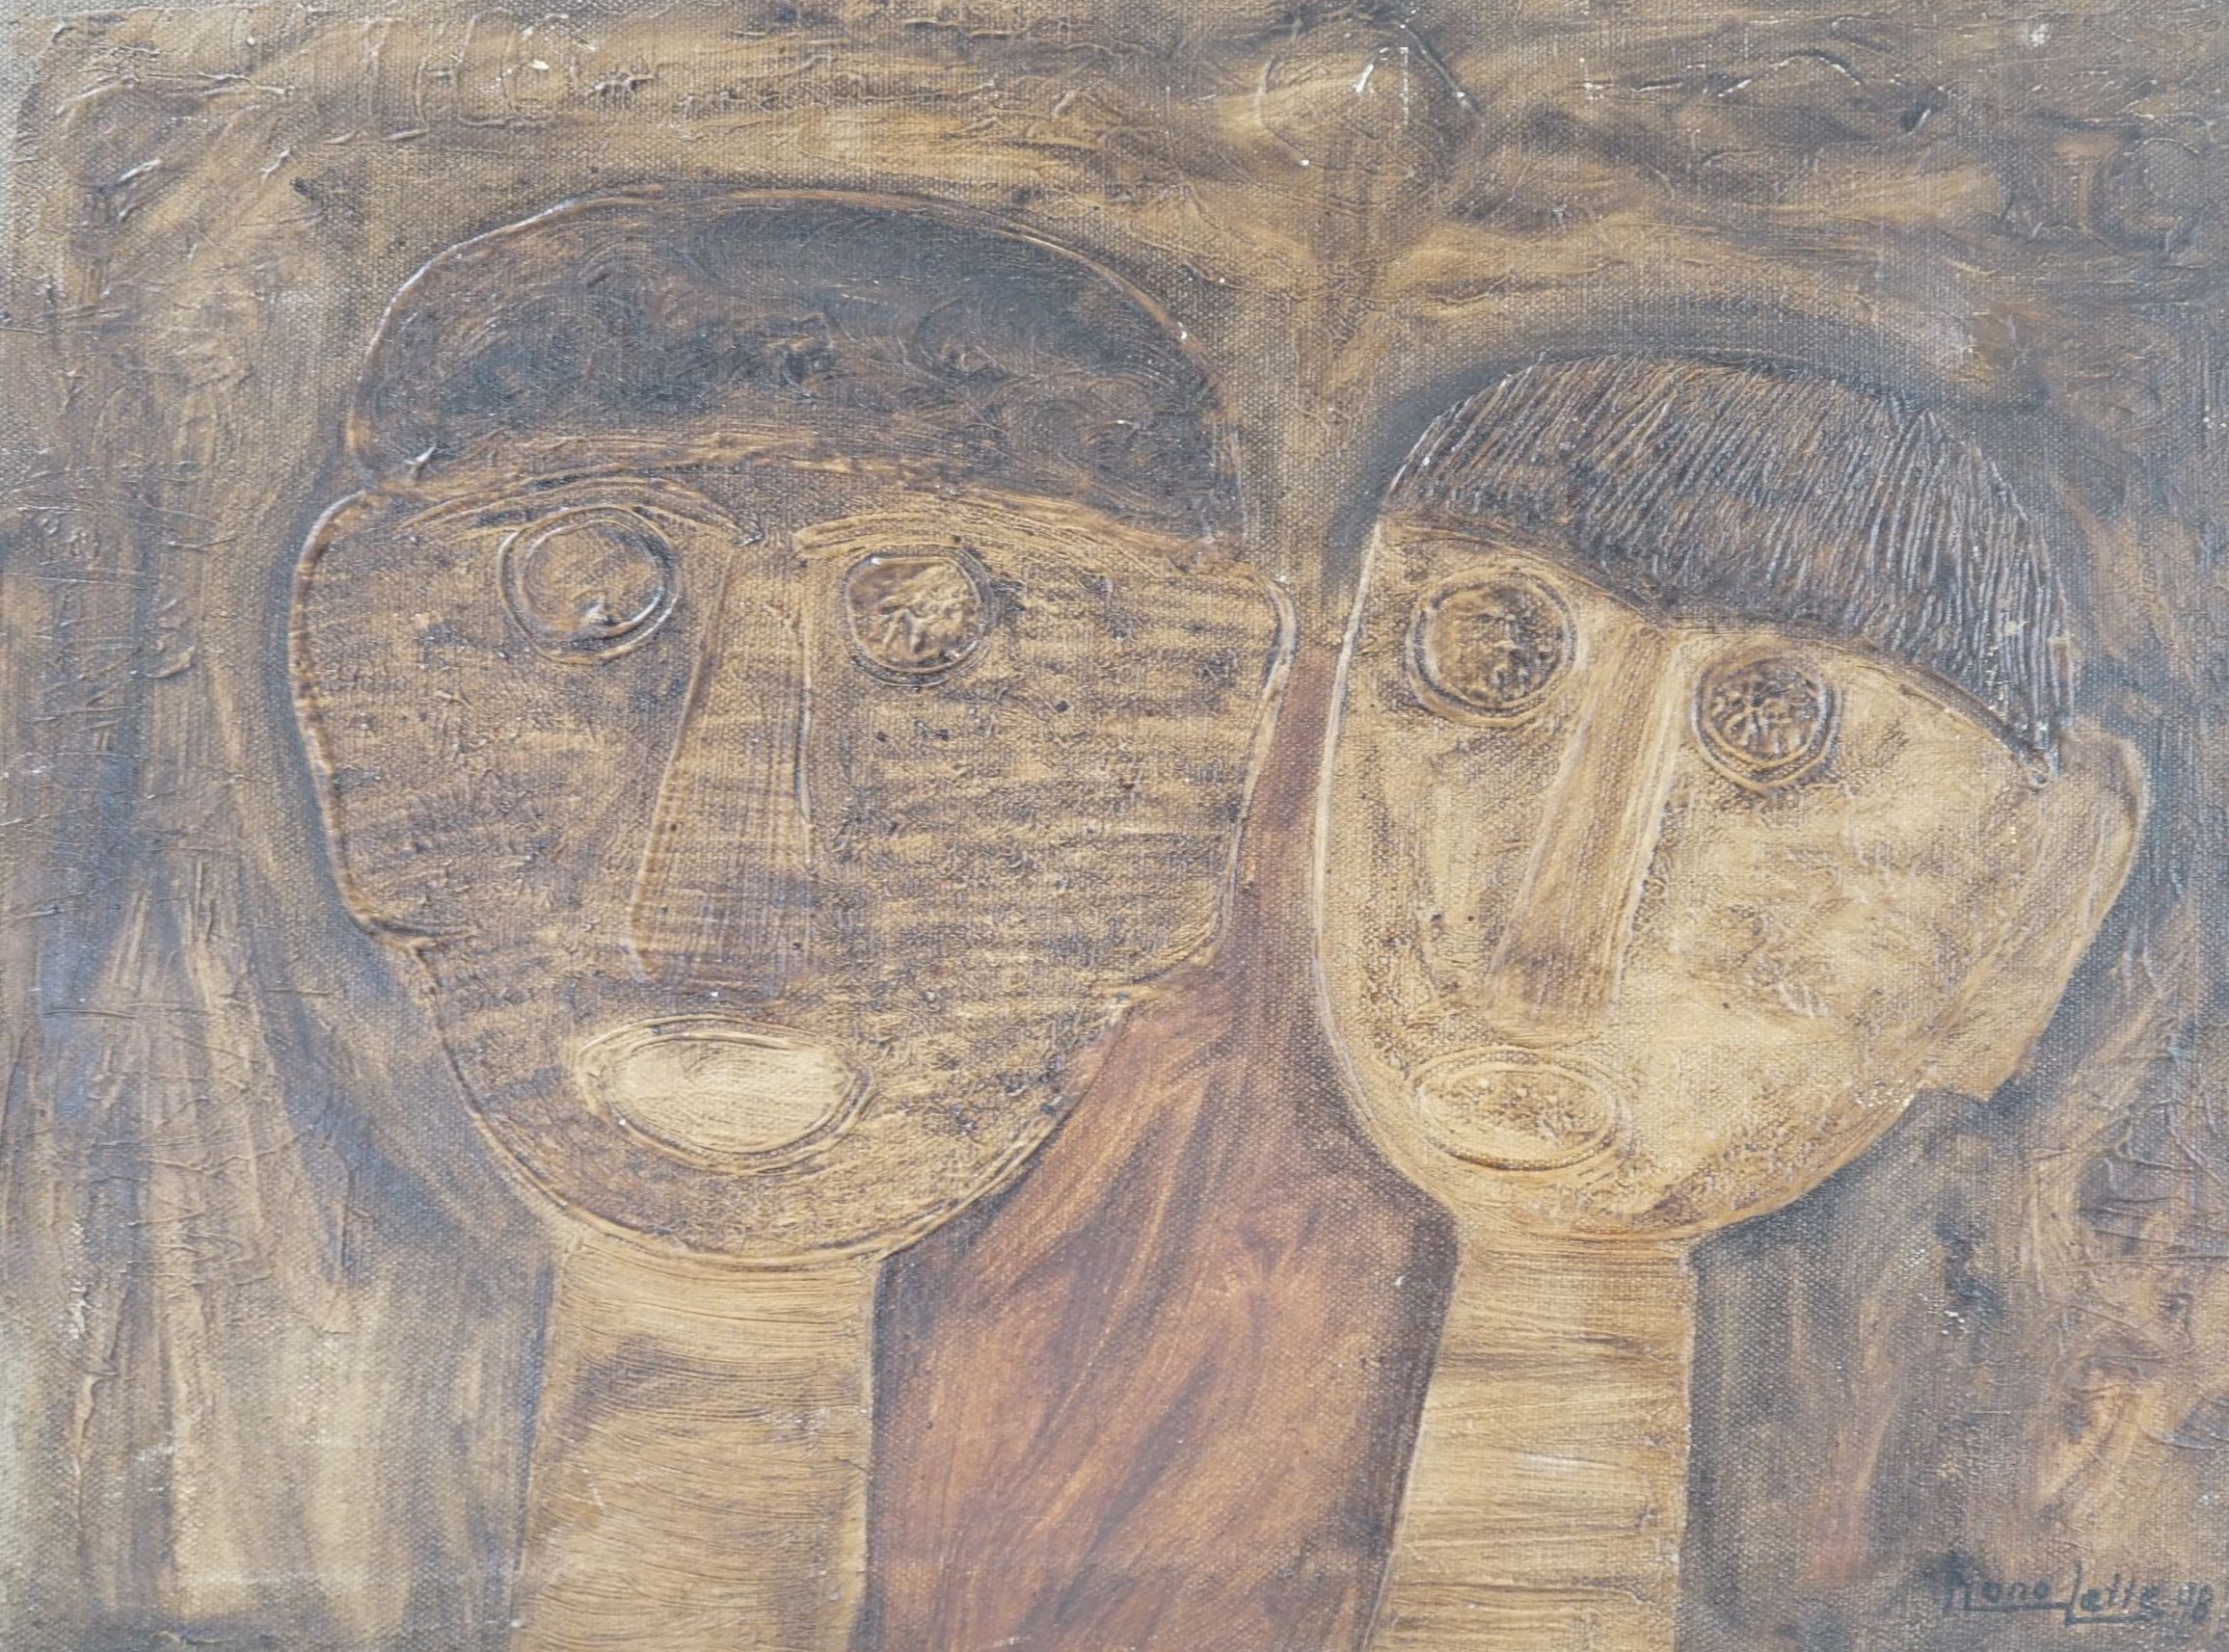 Hono Lette (Bali), oil on canvas, 'Two Heads', signed and dated '98, 30 x 40cm, unframed